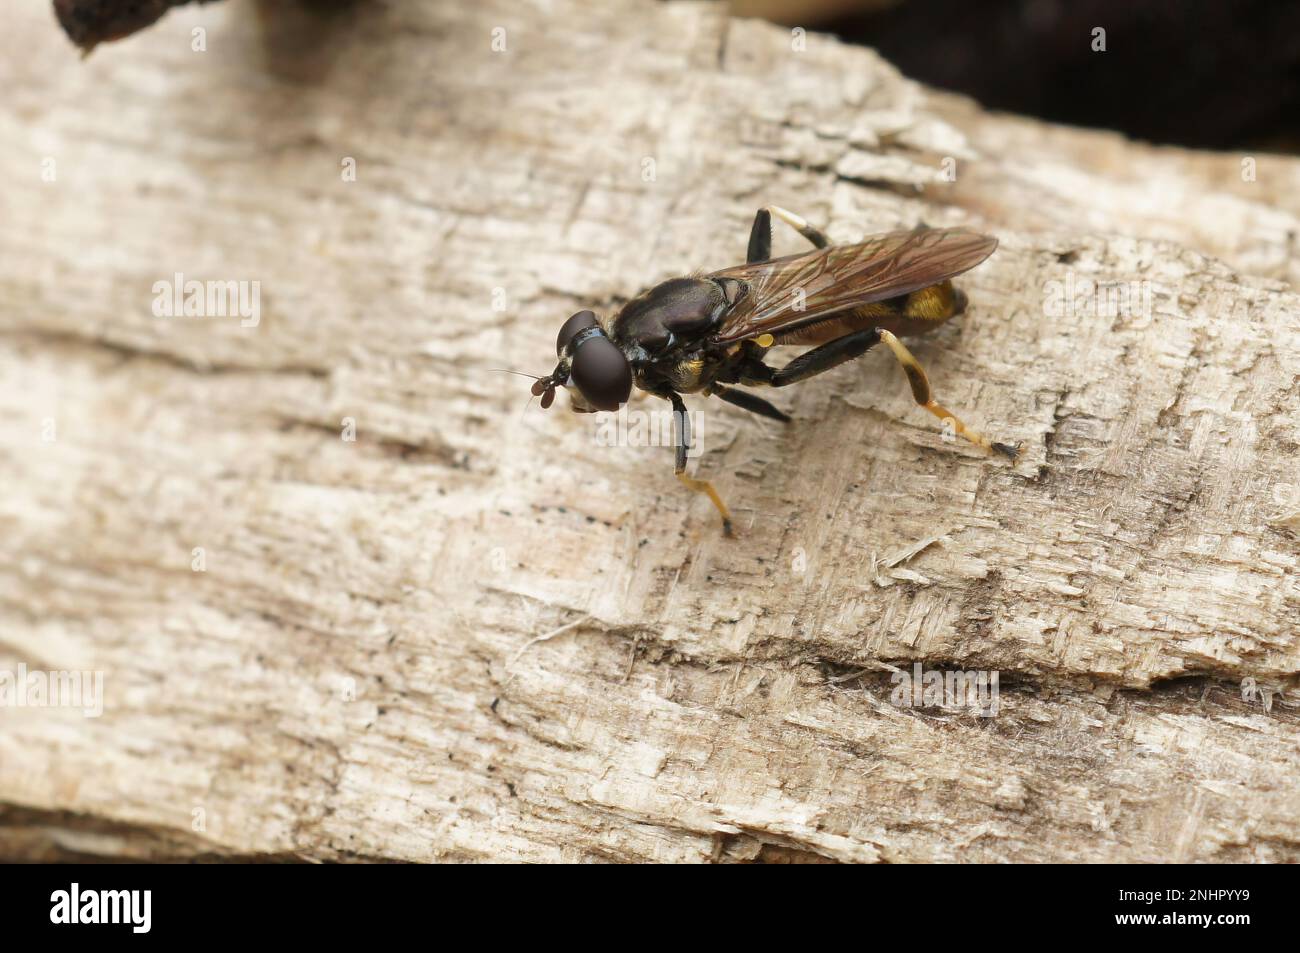 Closeup on a Lazy wood fly, Xylota segnis, sitting on wood in the forrest Stock Photo